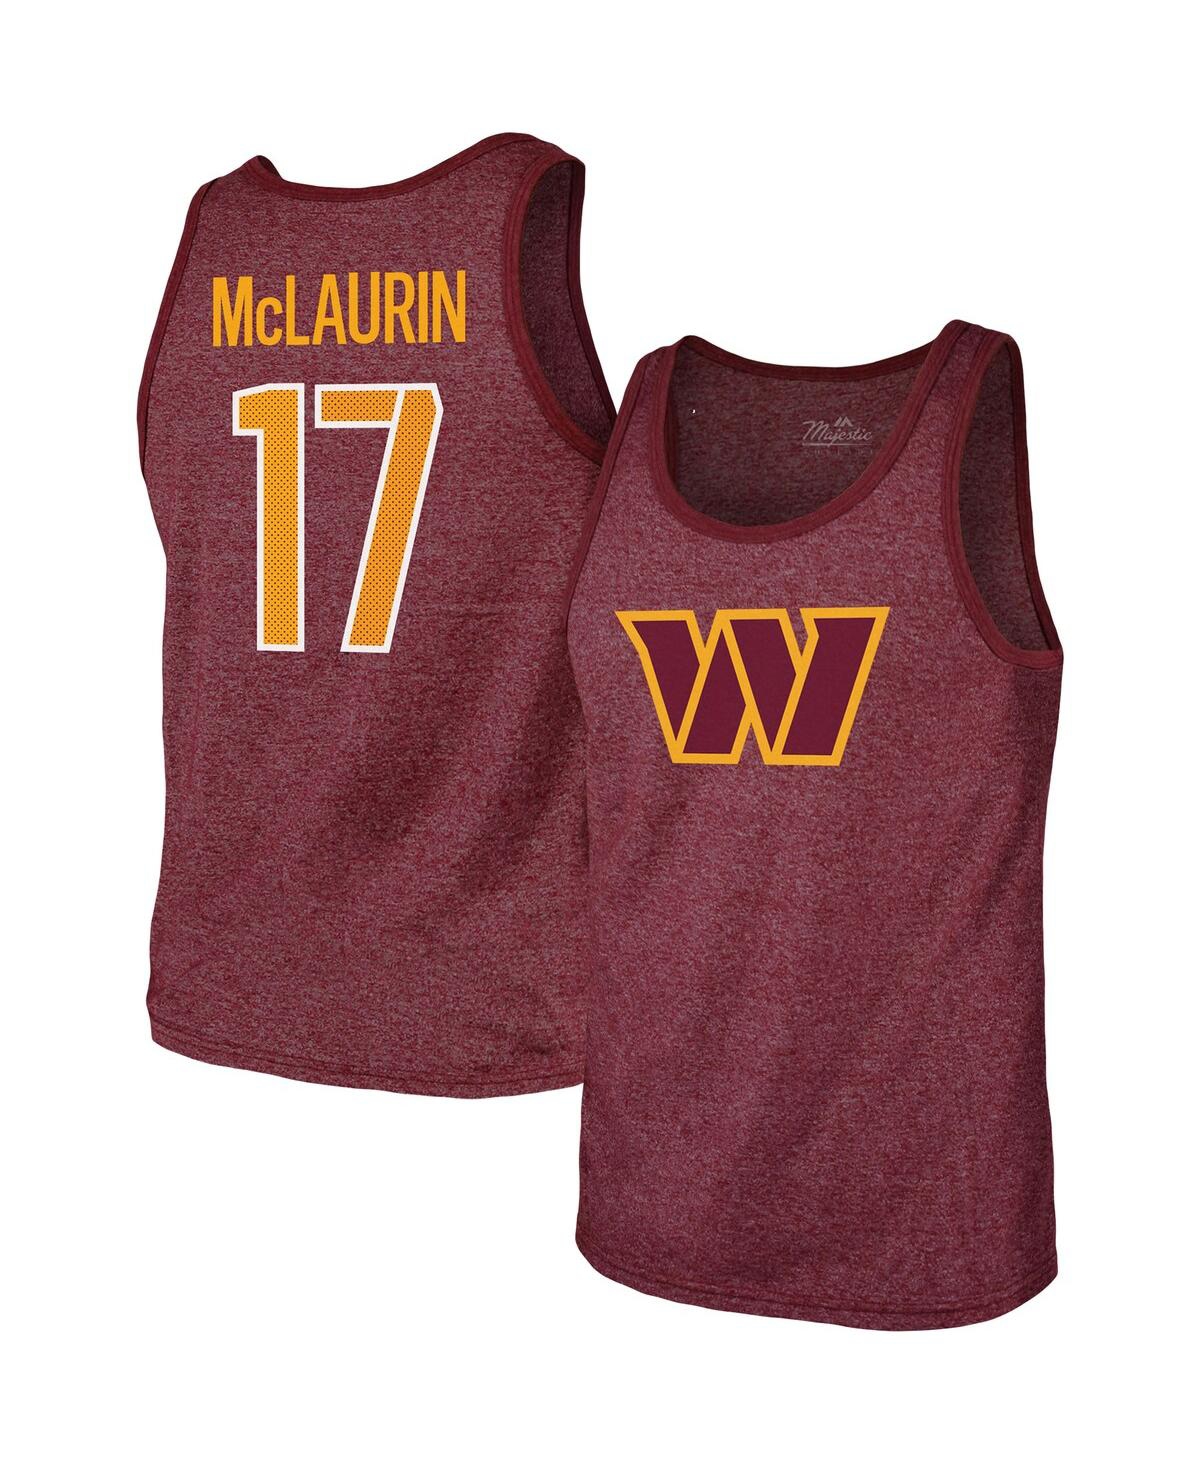 Majestic Men's  Threads Terry Mclaurin Heathered Burgundy Washington Commanders Player Name & Number In Heathered Brown